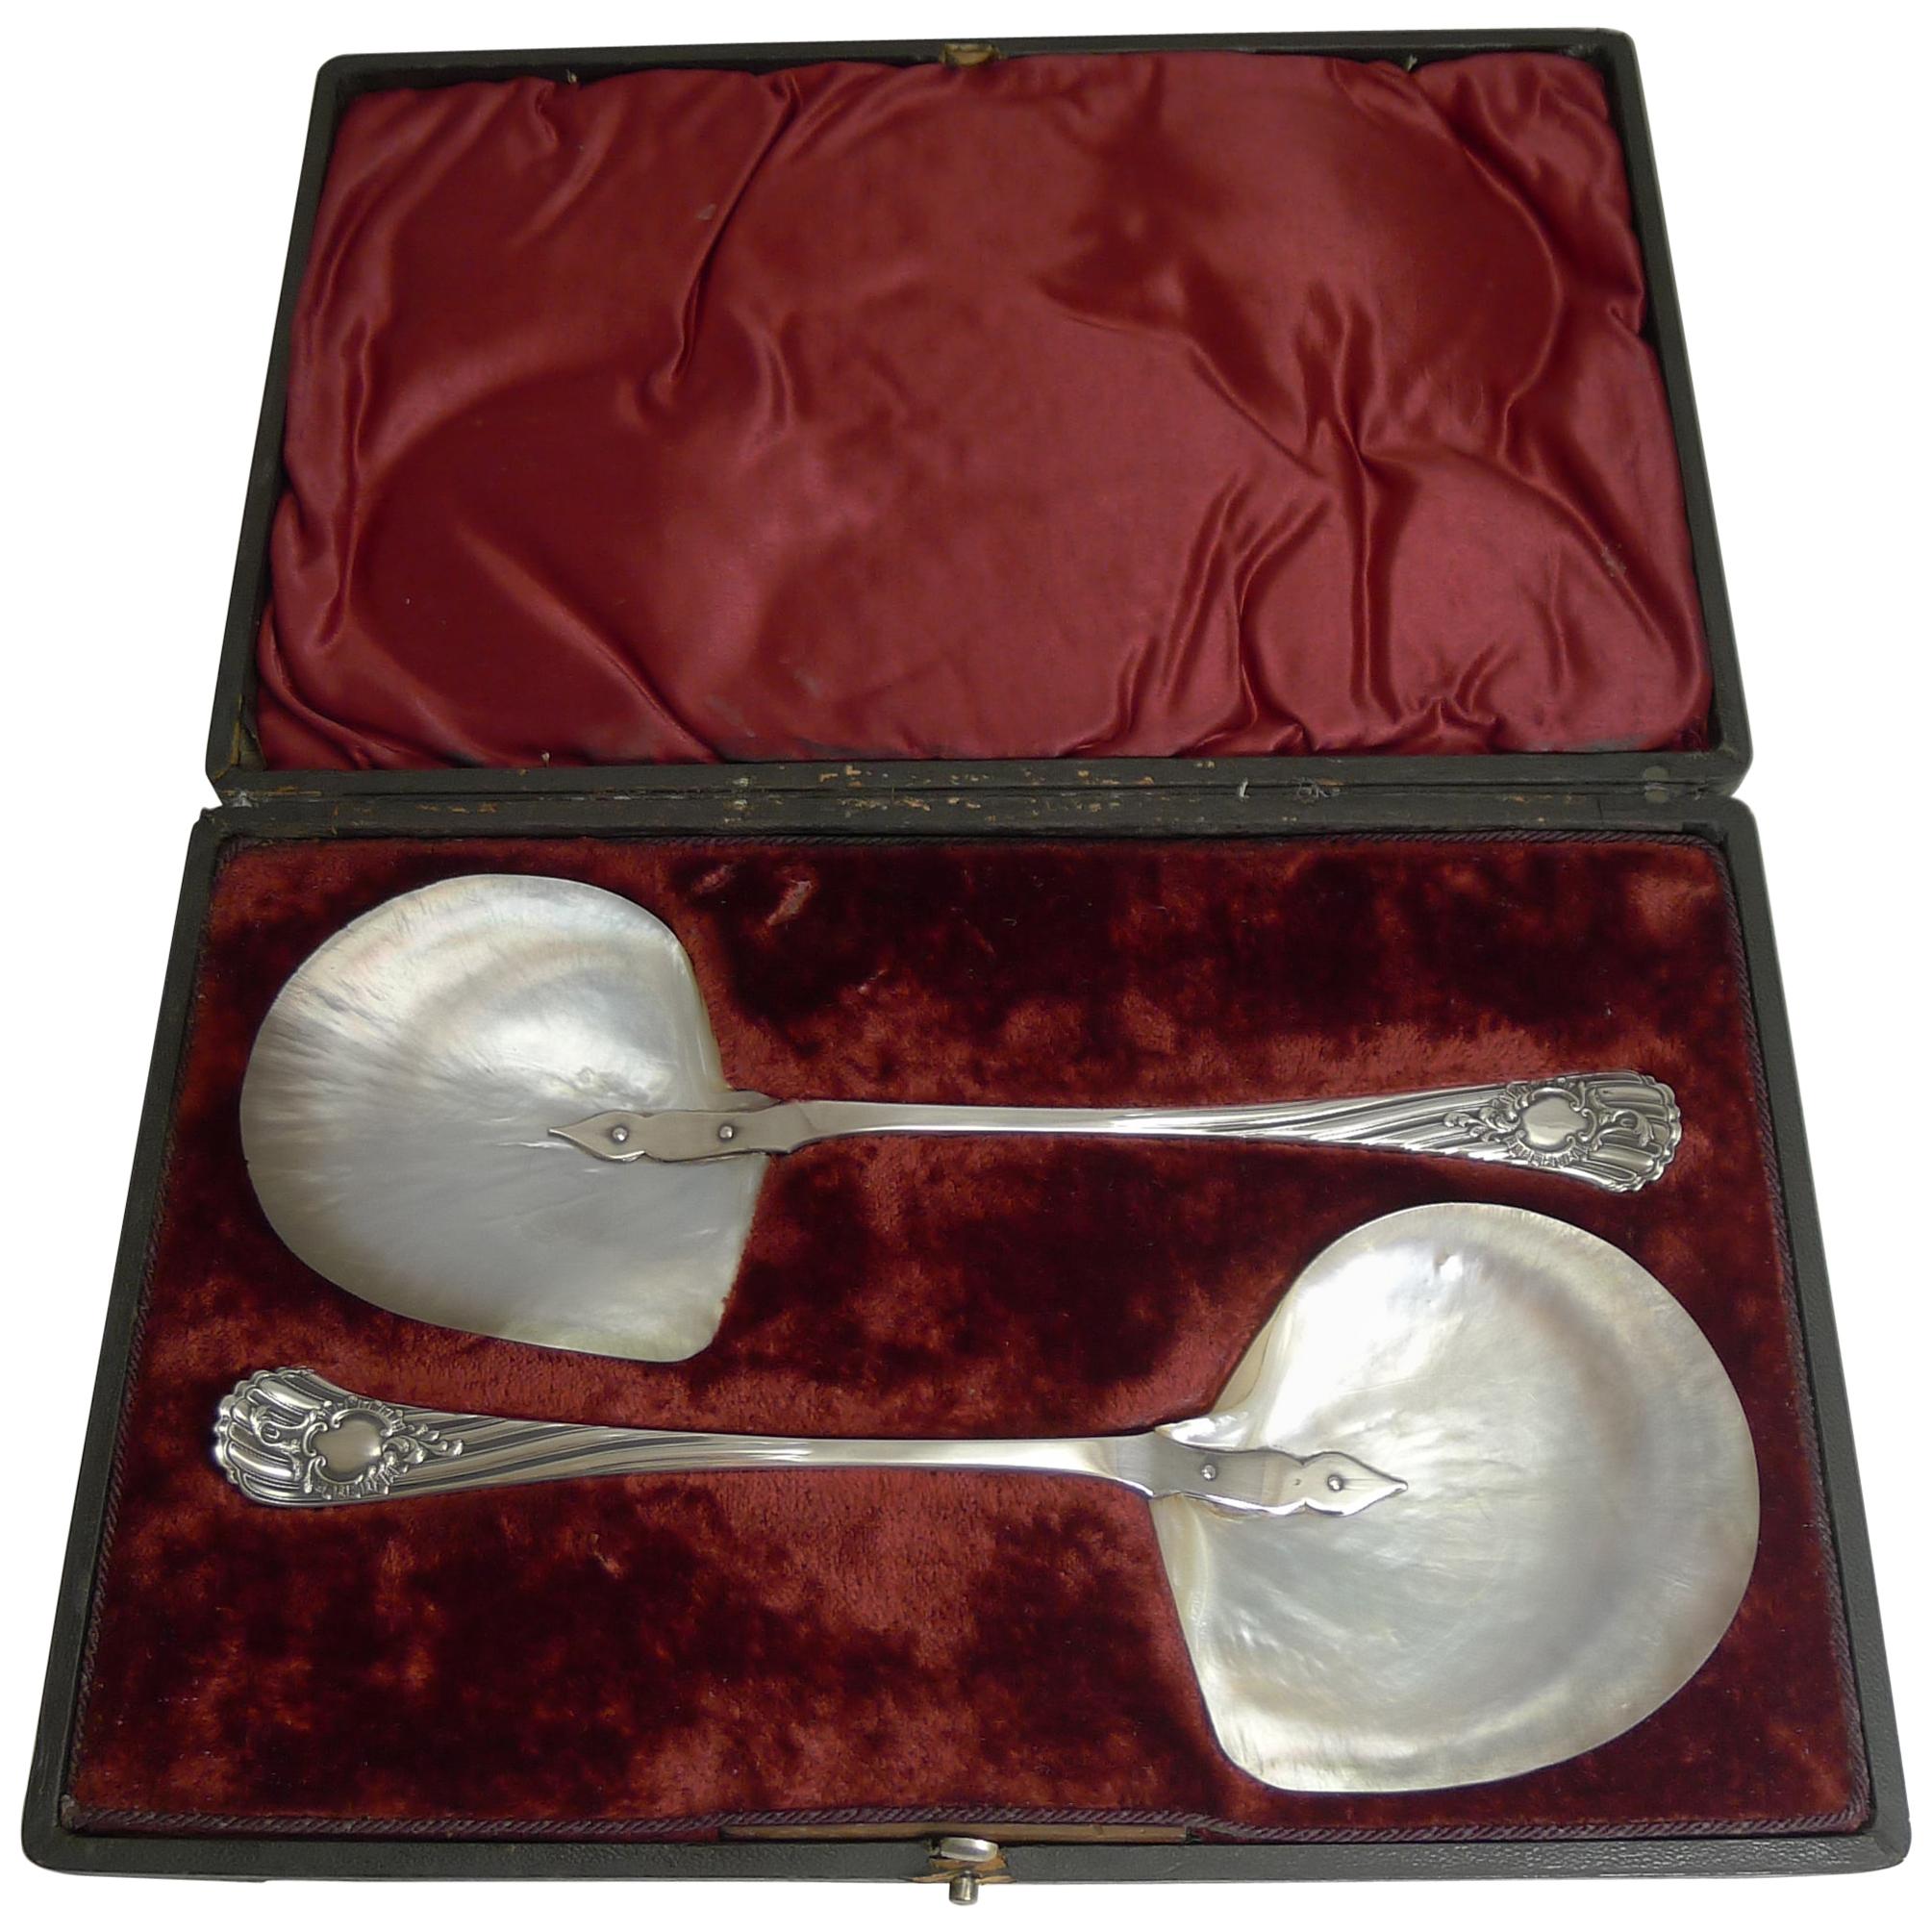 Boxed Pair of Antique English Caviar Serving Spoons by James Dixon, circa 1891